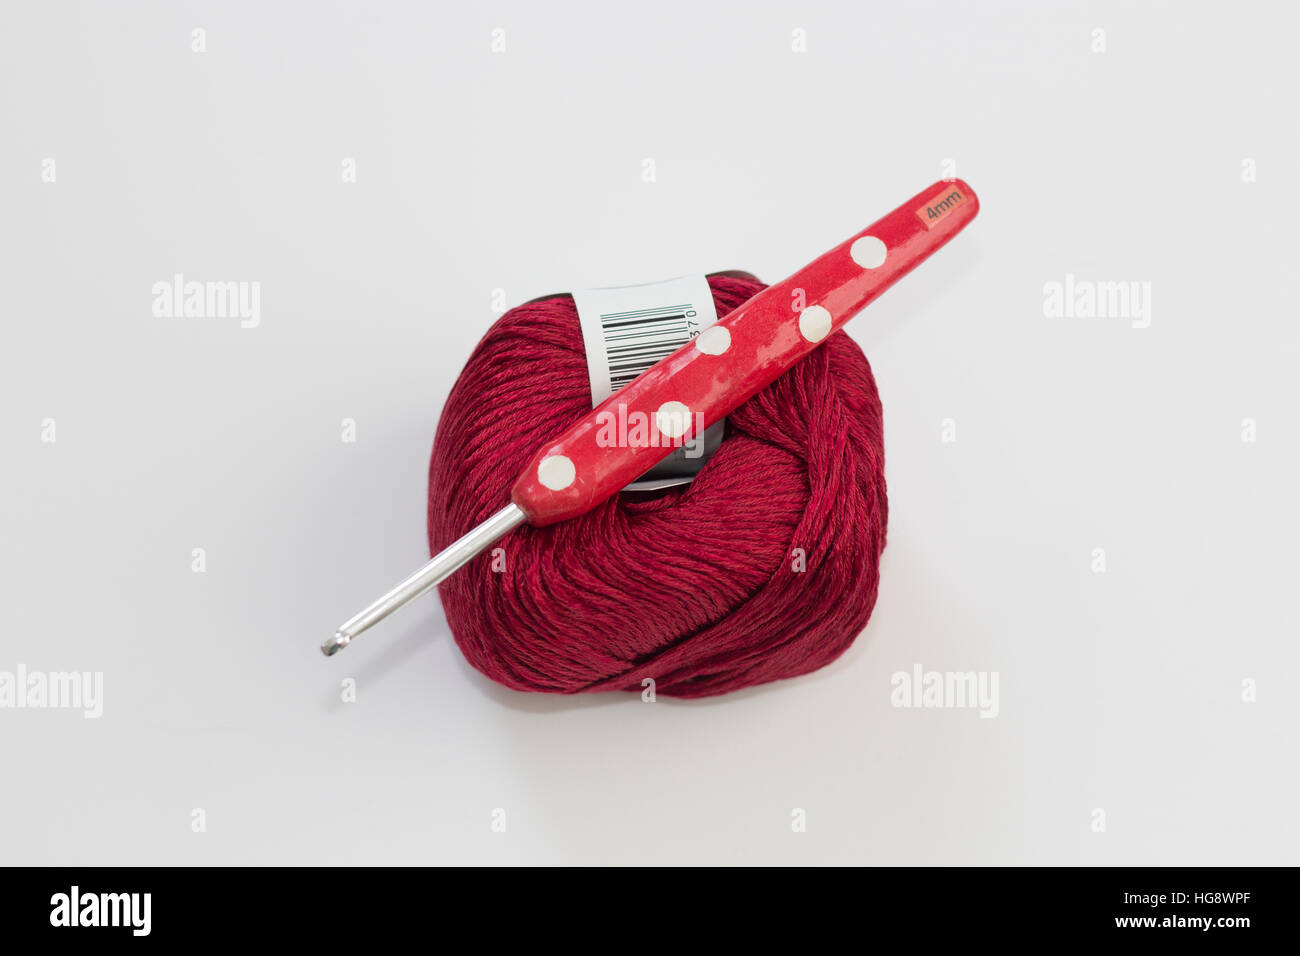 Red ball of wool with red novelty crochet hook on white background Stock Photo